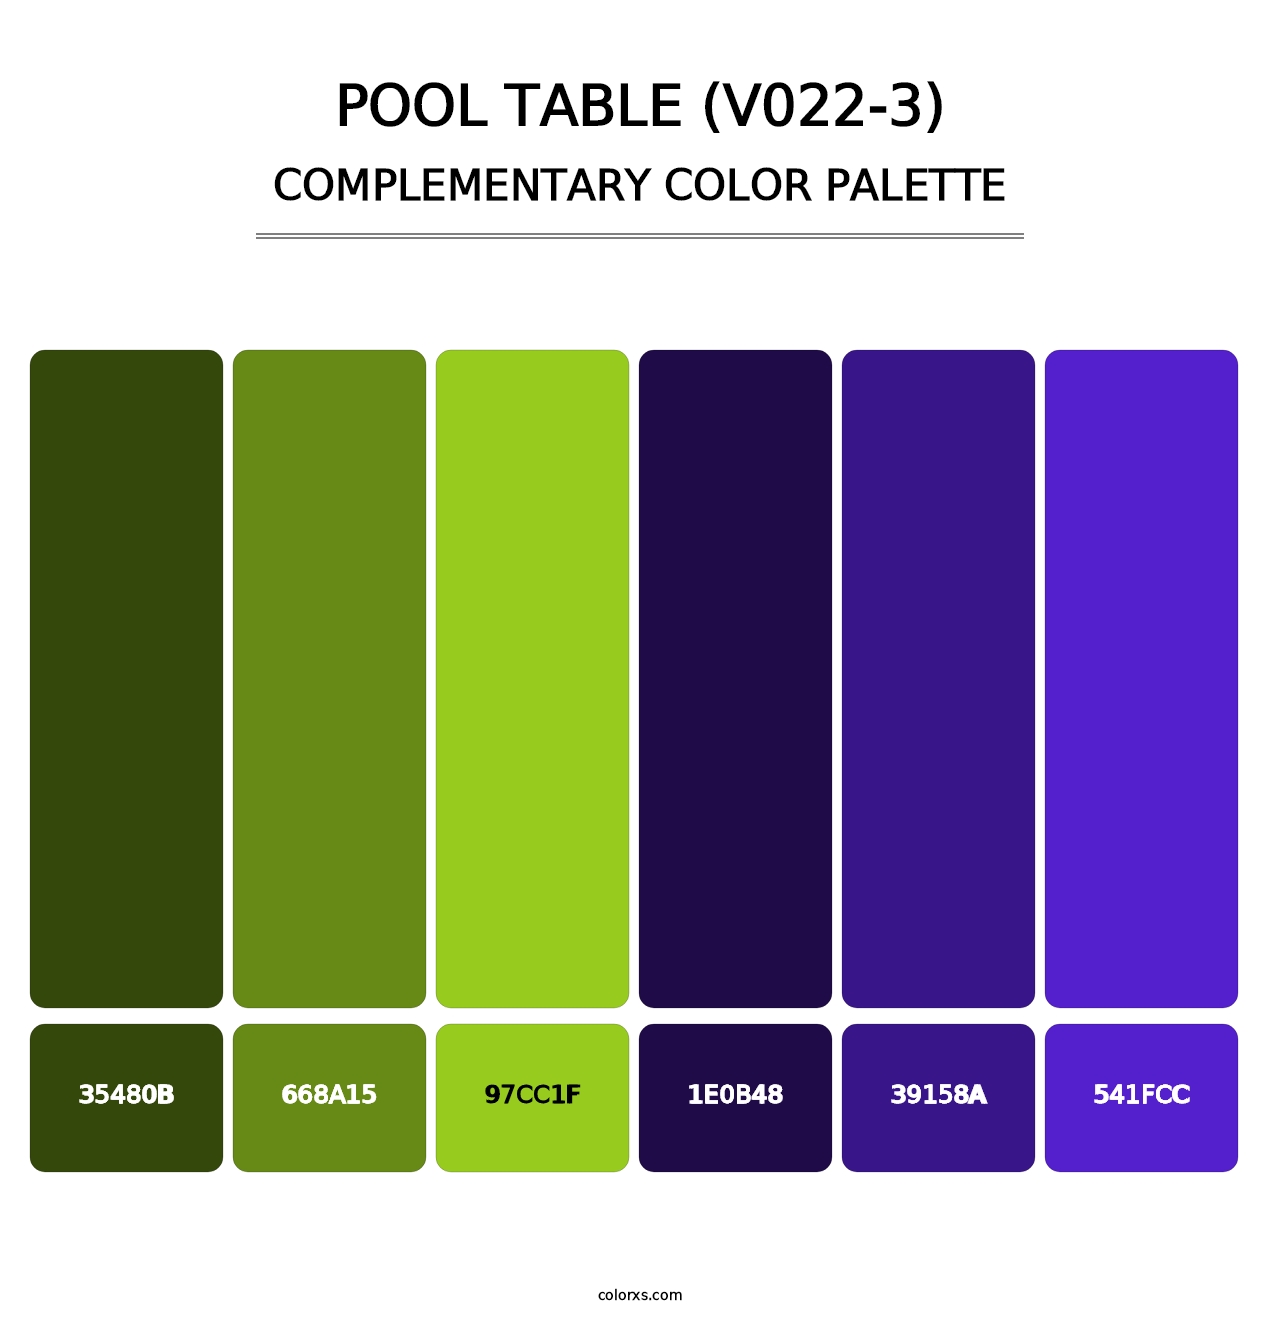 Pool Table (V022-3) - Complementary Color Palette